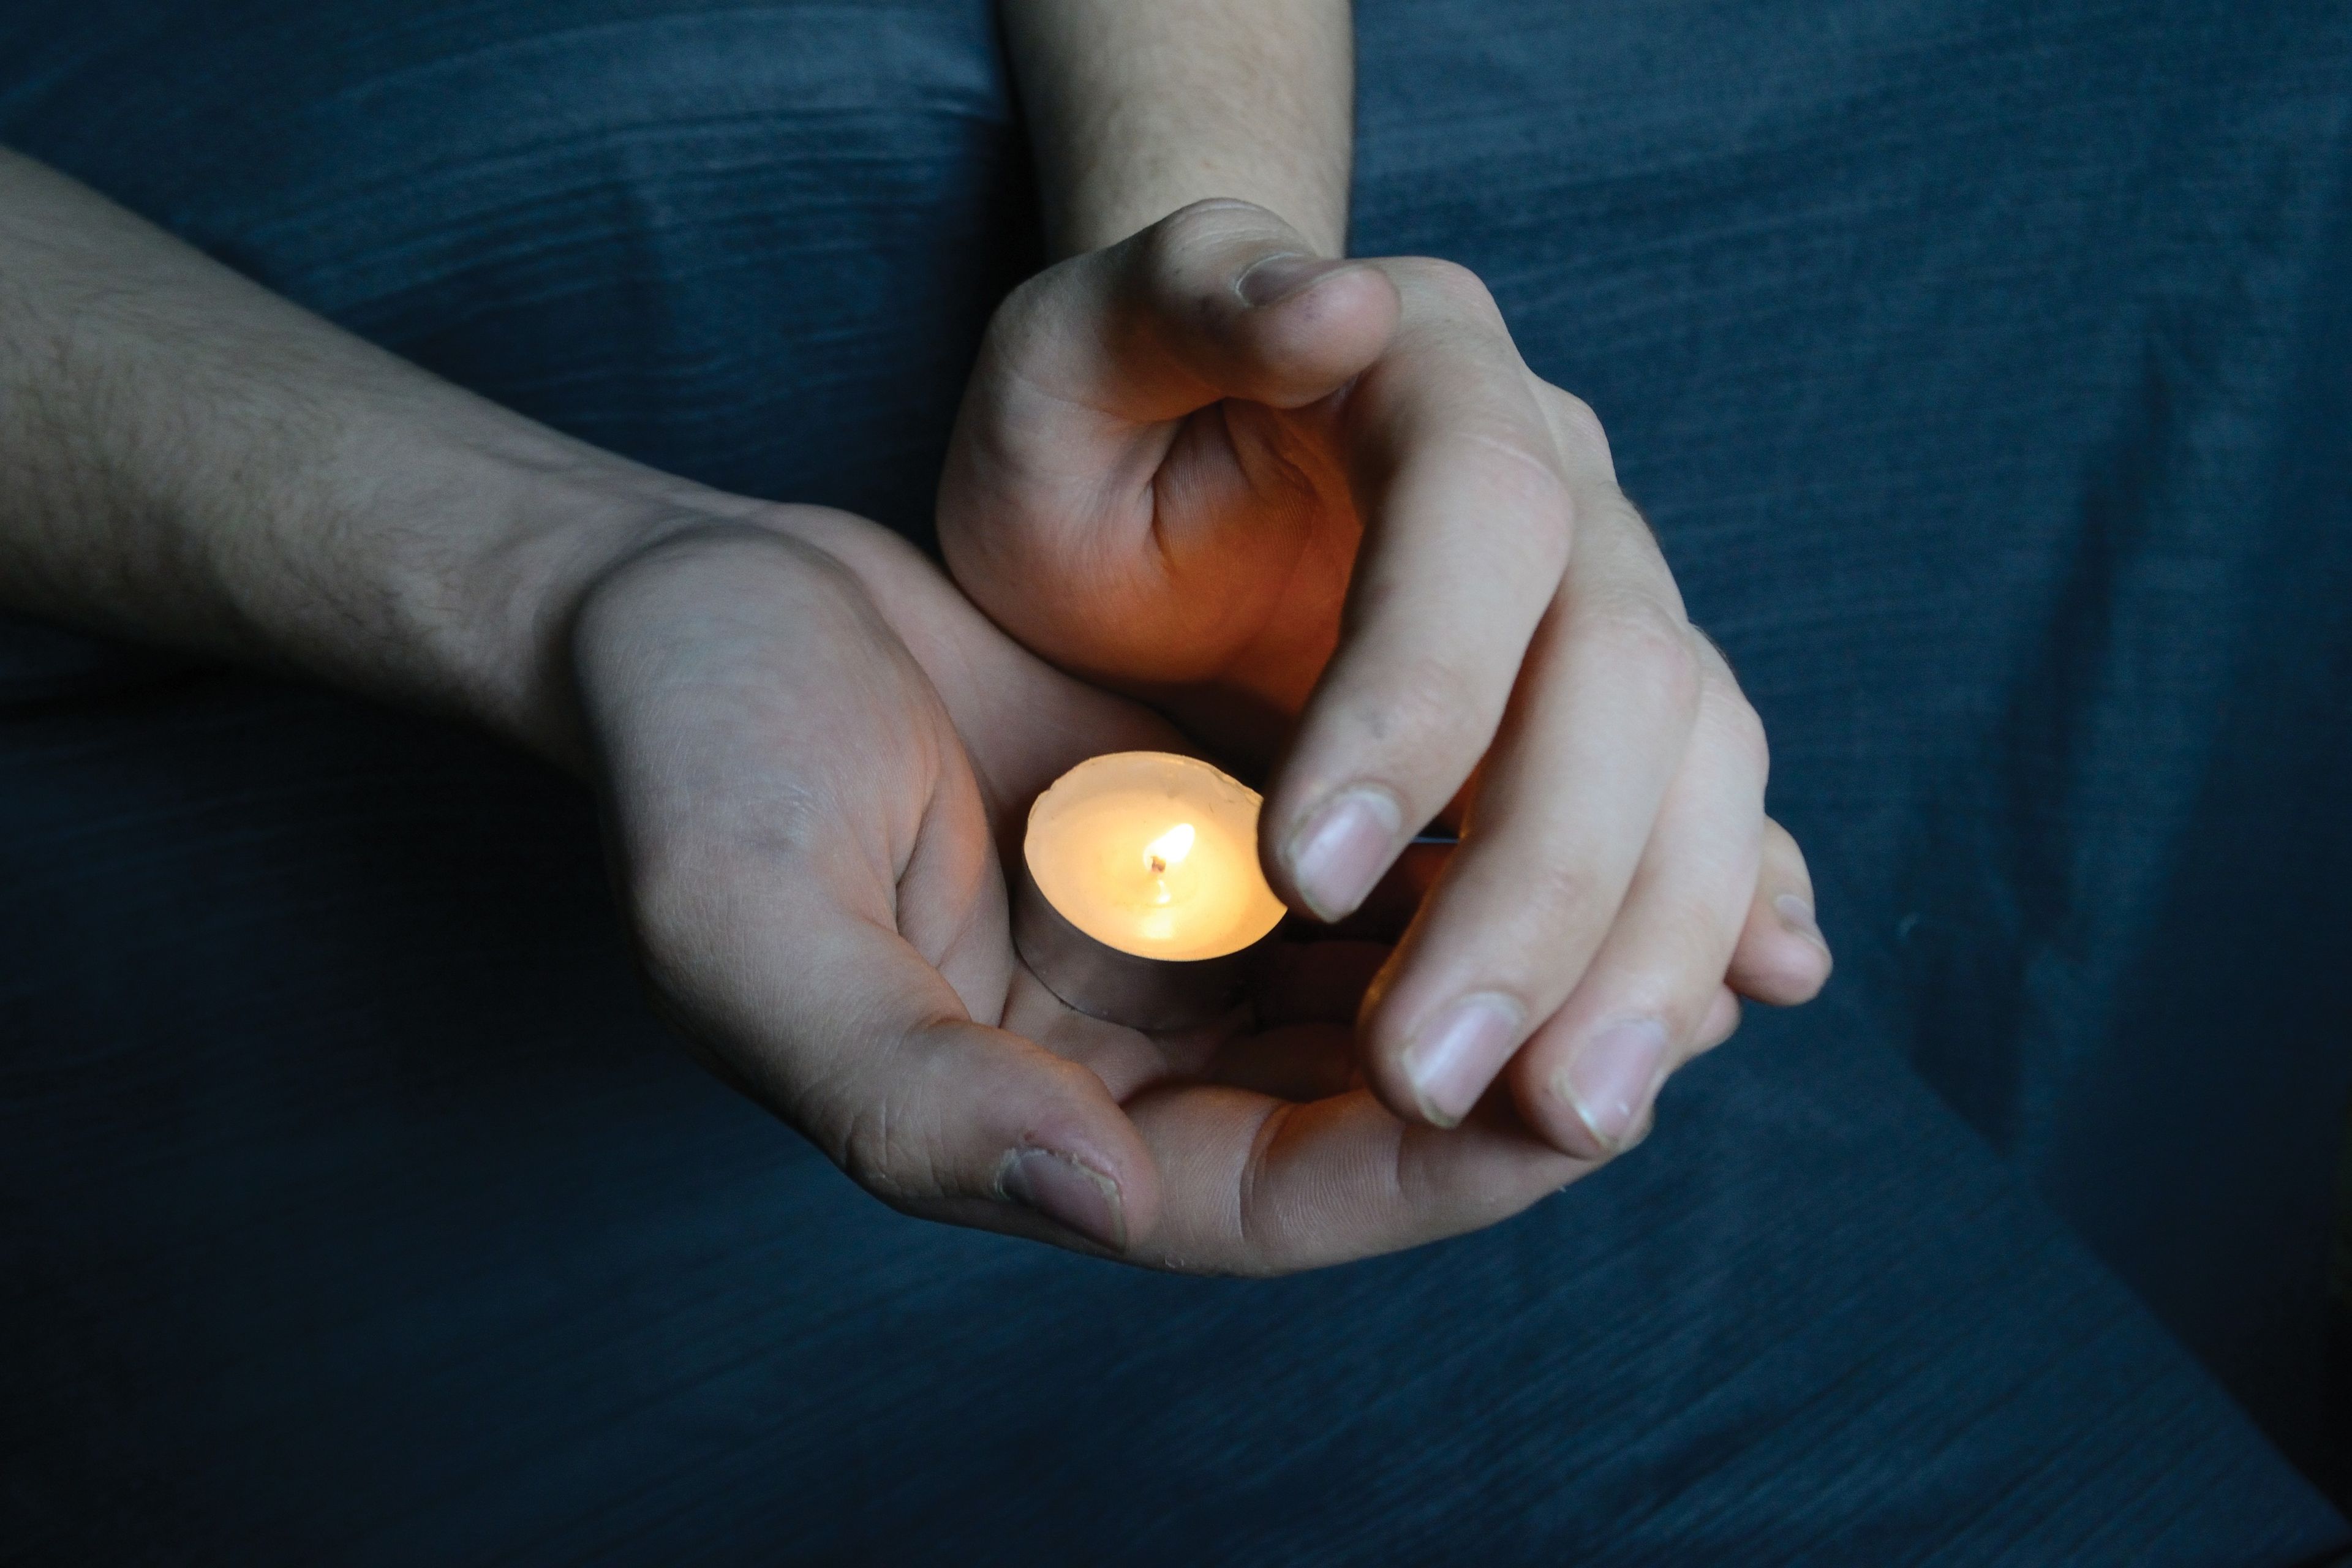 Hands holding a candle in the dark, sheltering the flame from the wind.